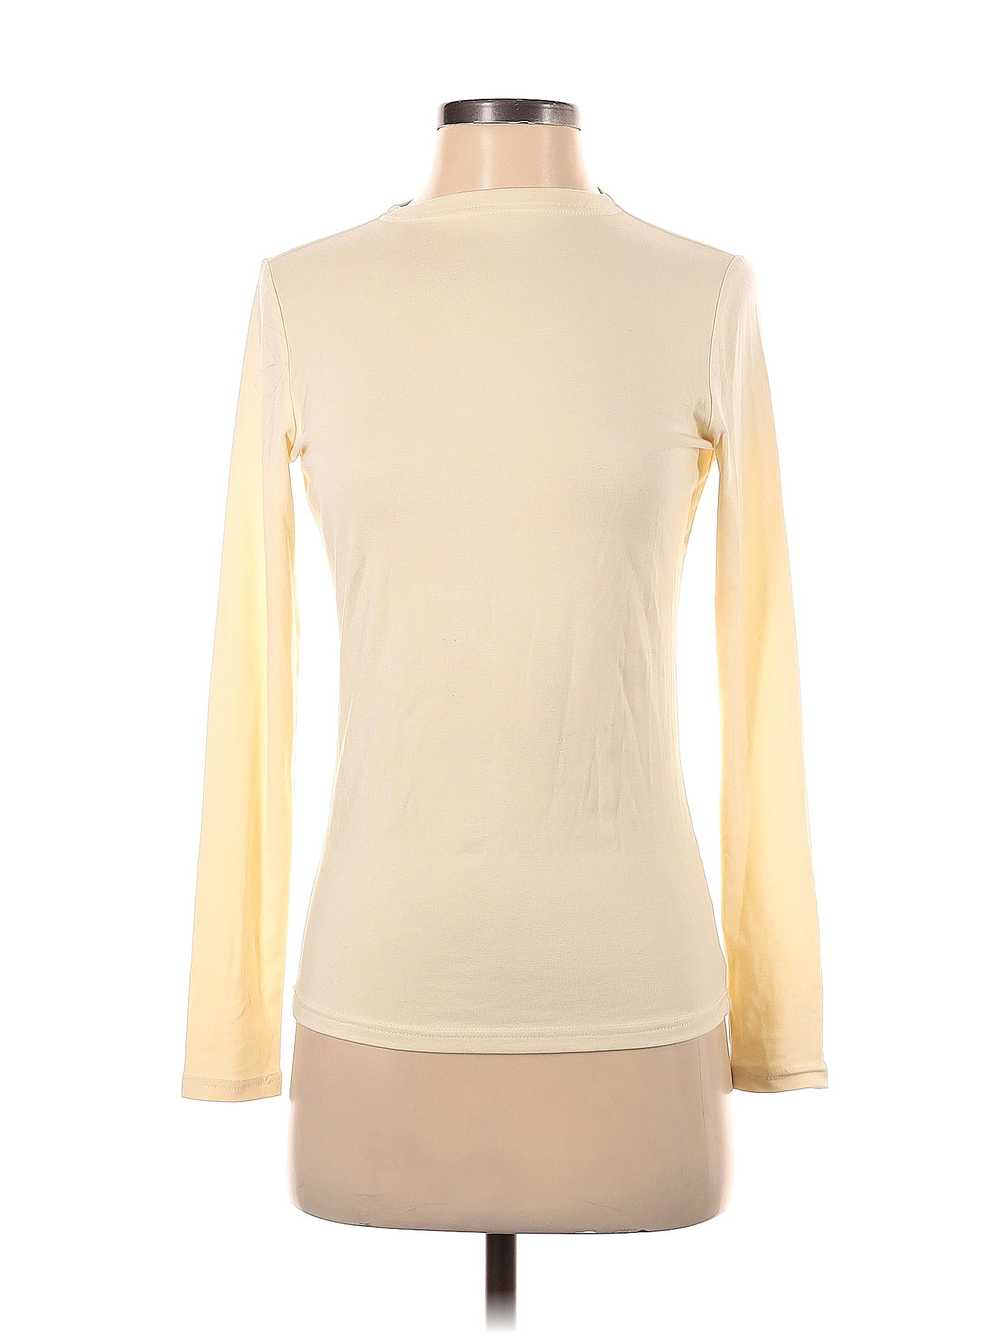 IN:05 Women Ivory Pullover Sweater S - image 1